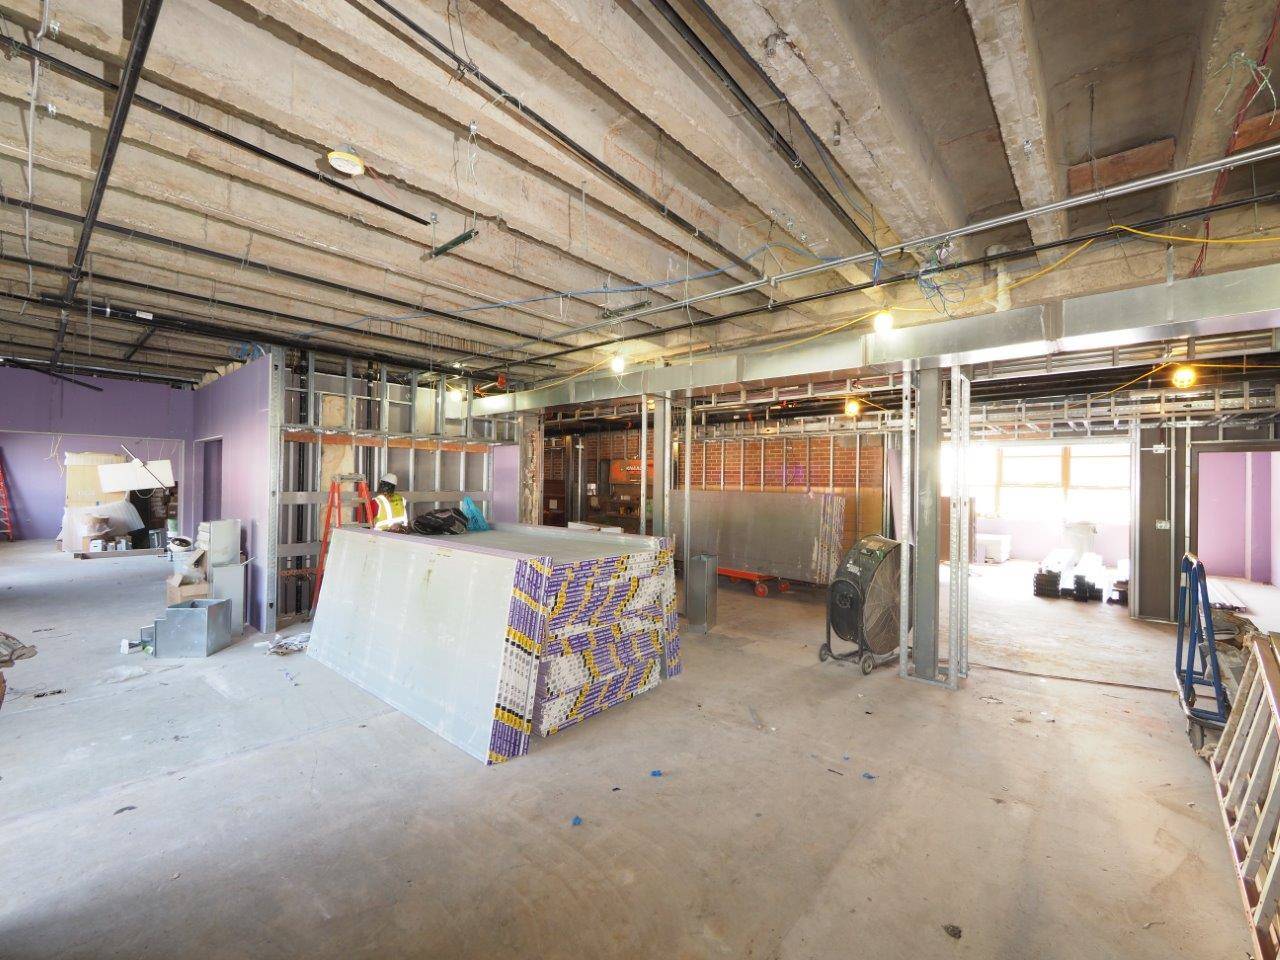 Inside the Tremont Elementary School renovation project